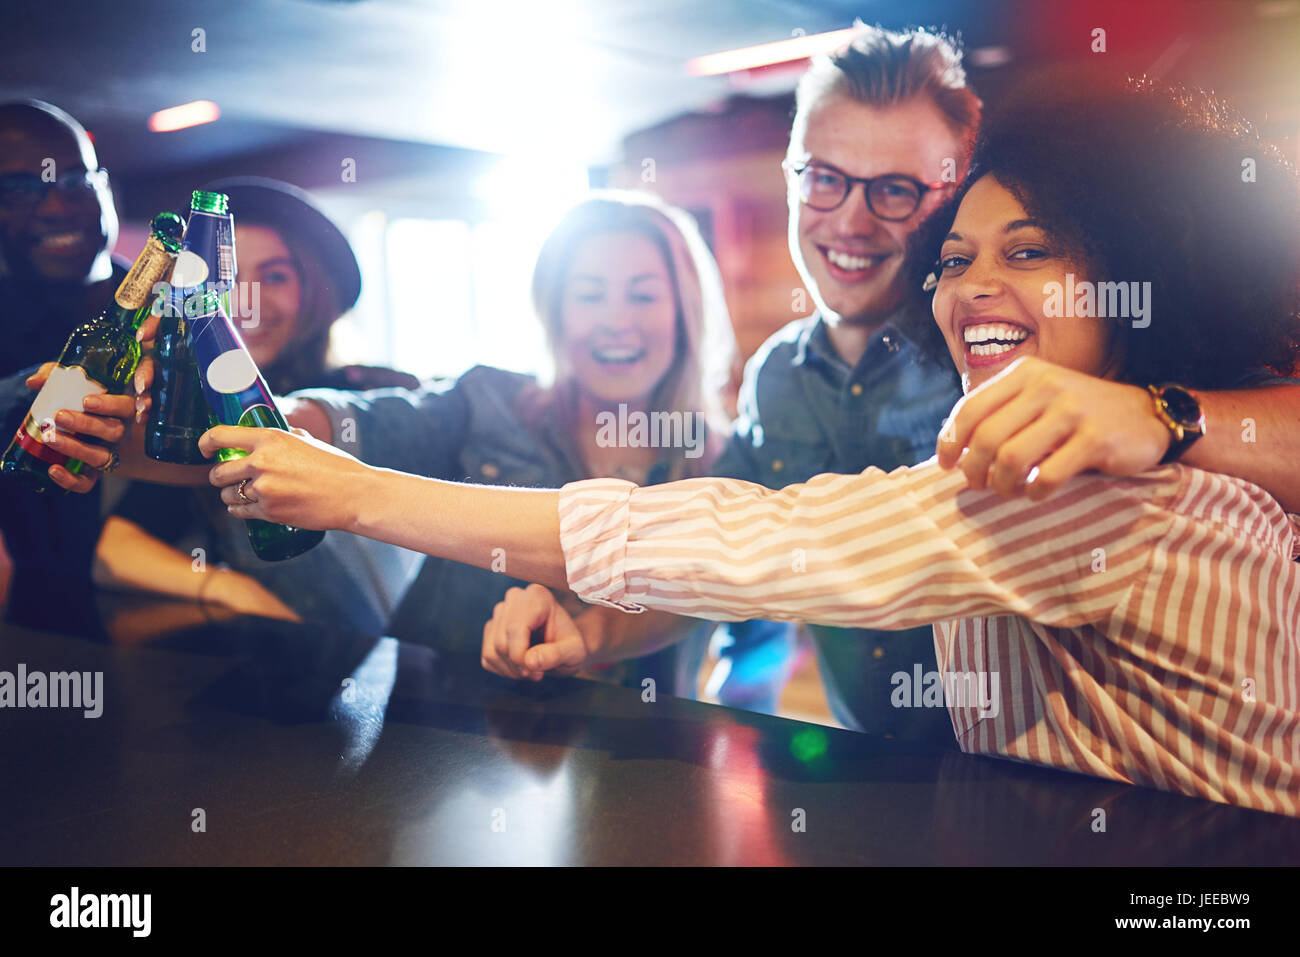 Horizontal indoors shot of happy people smiling and embracing while clanging bottles in the bar. Stock Photo